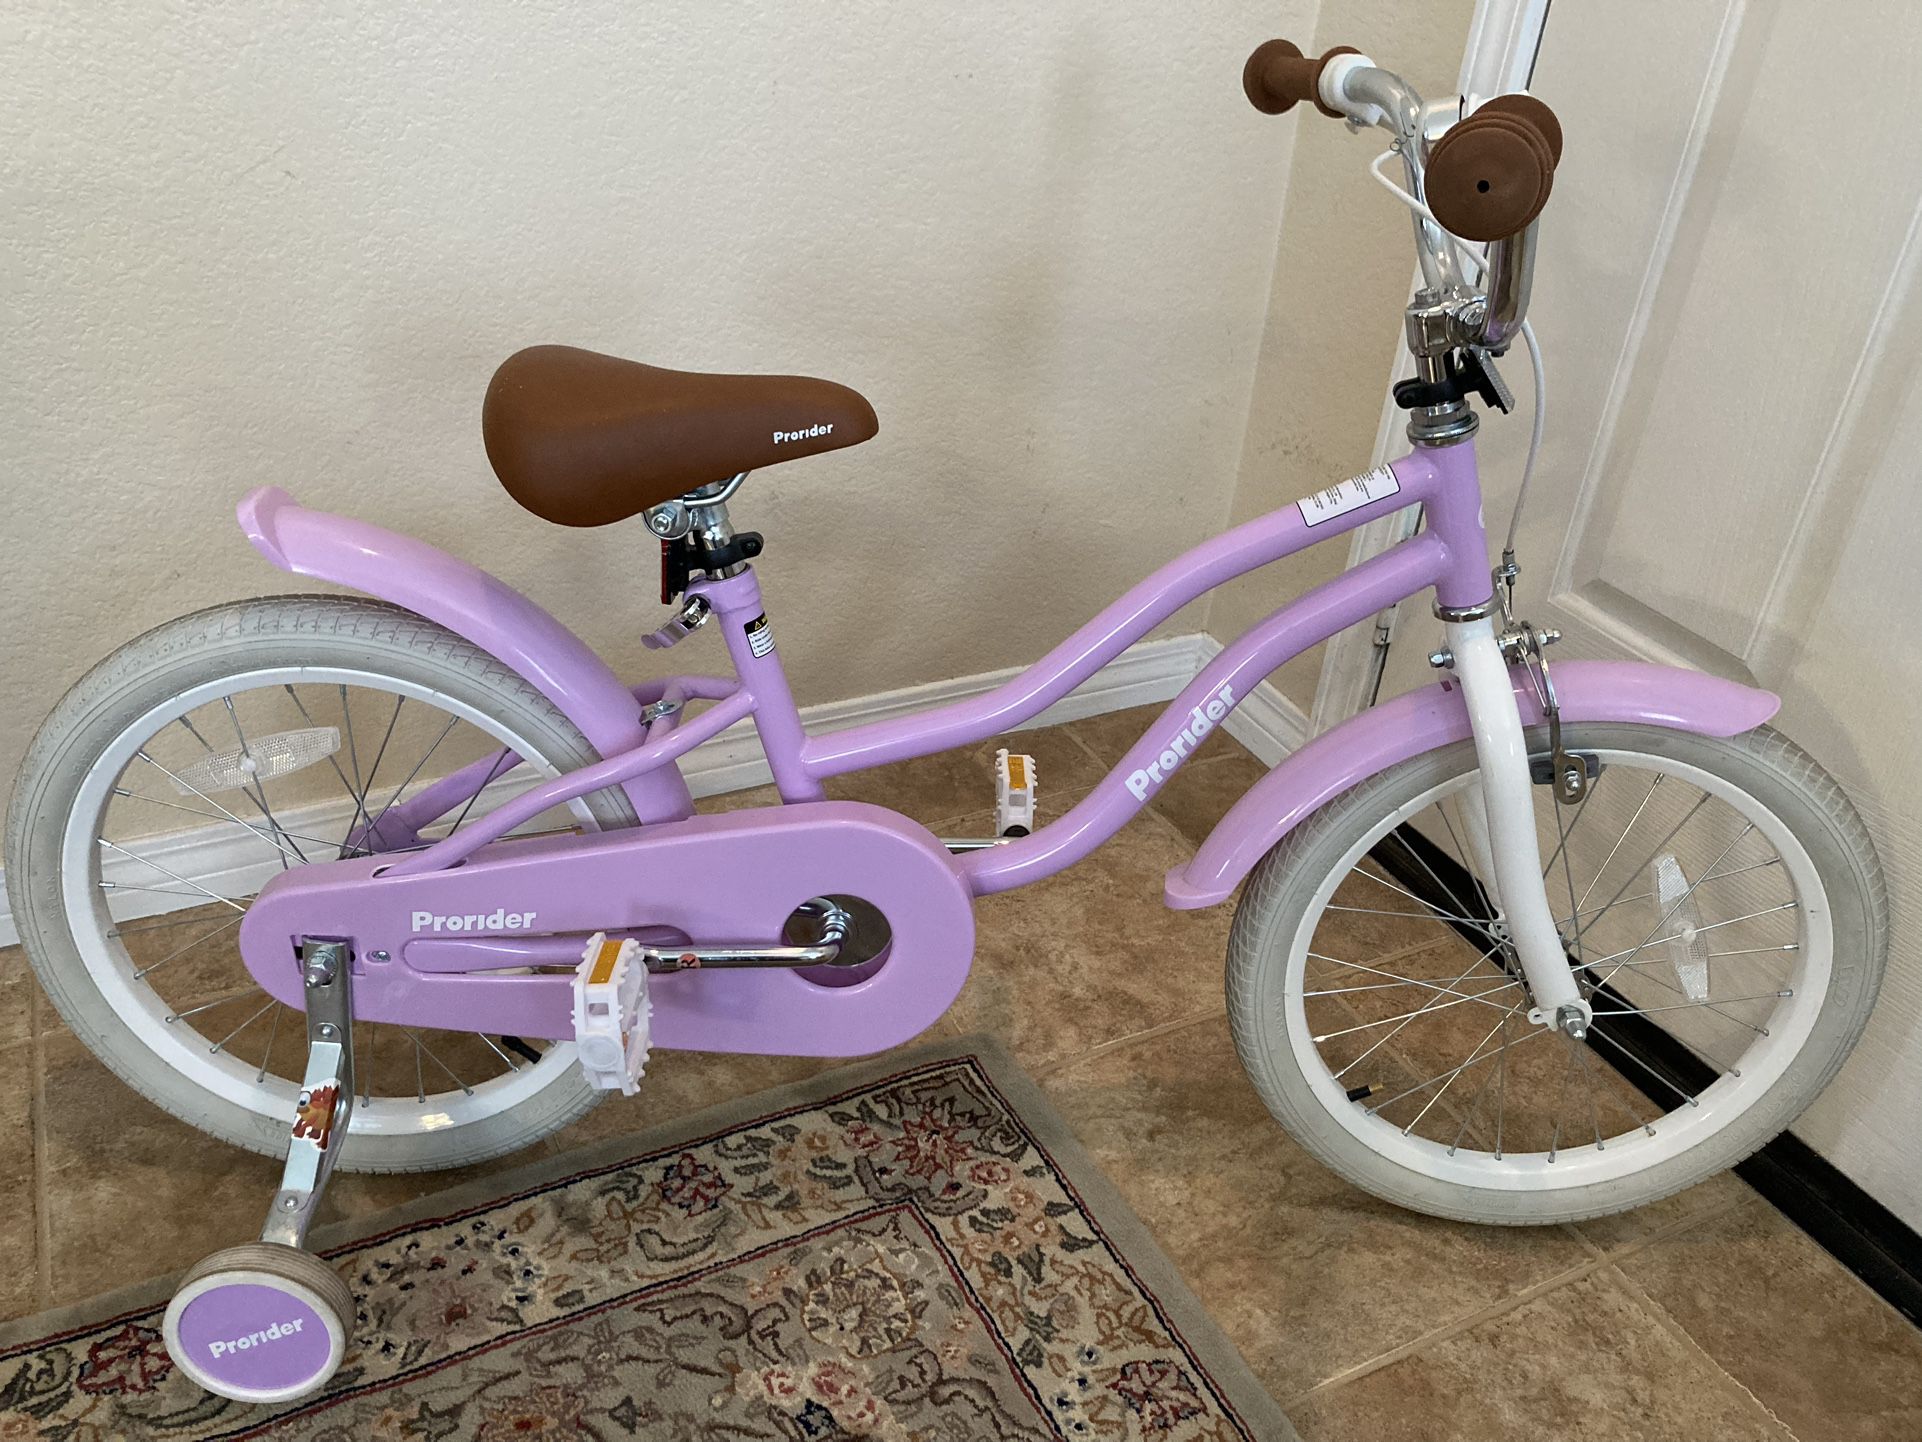 Girl’s Bicycle 18’ Prorider